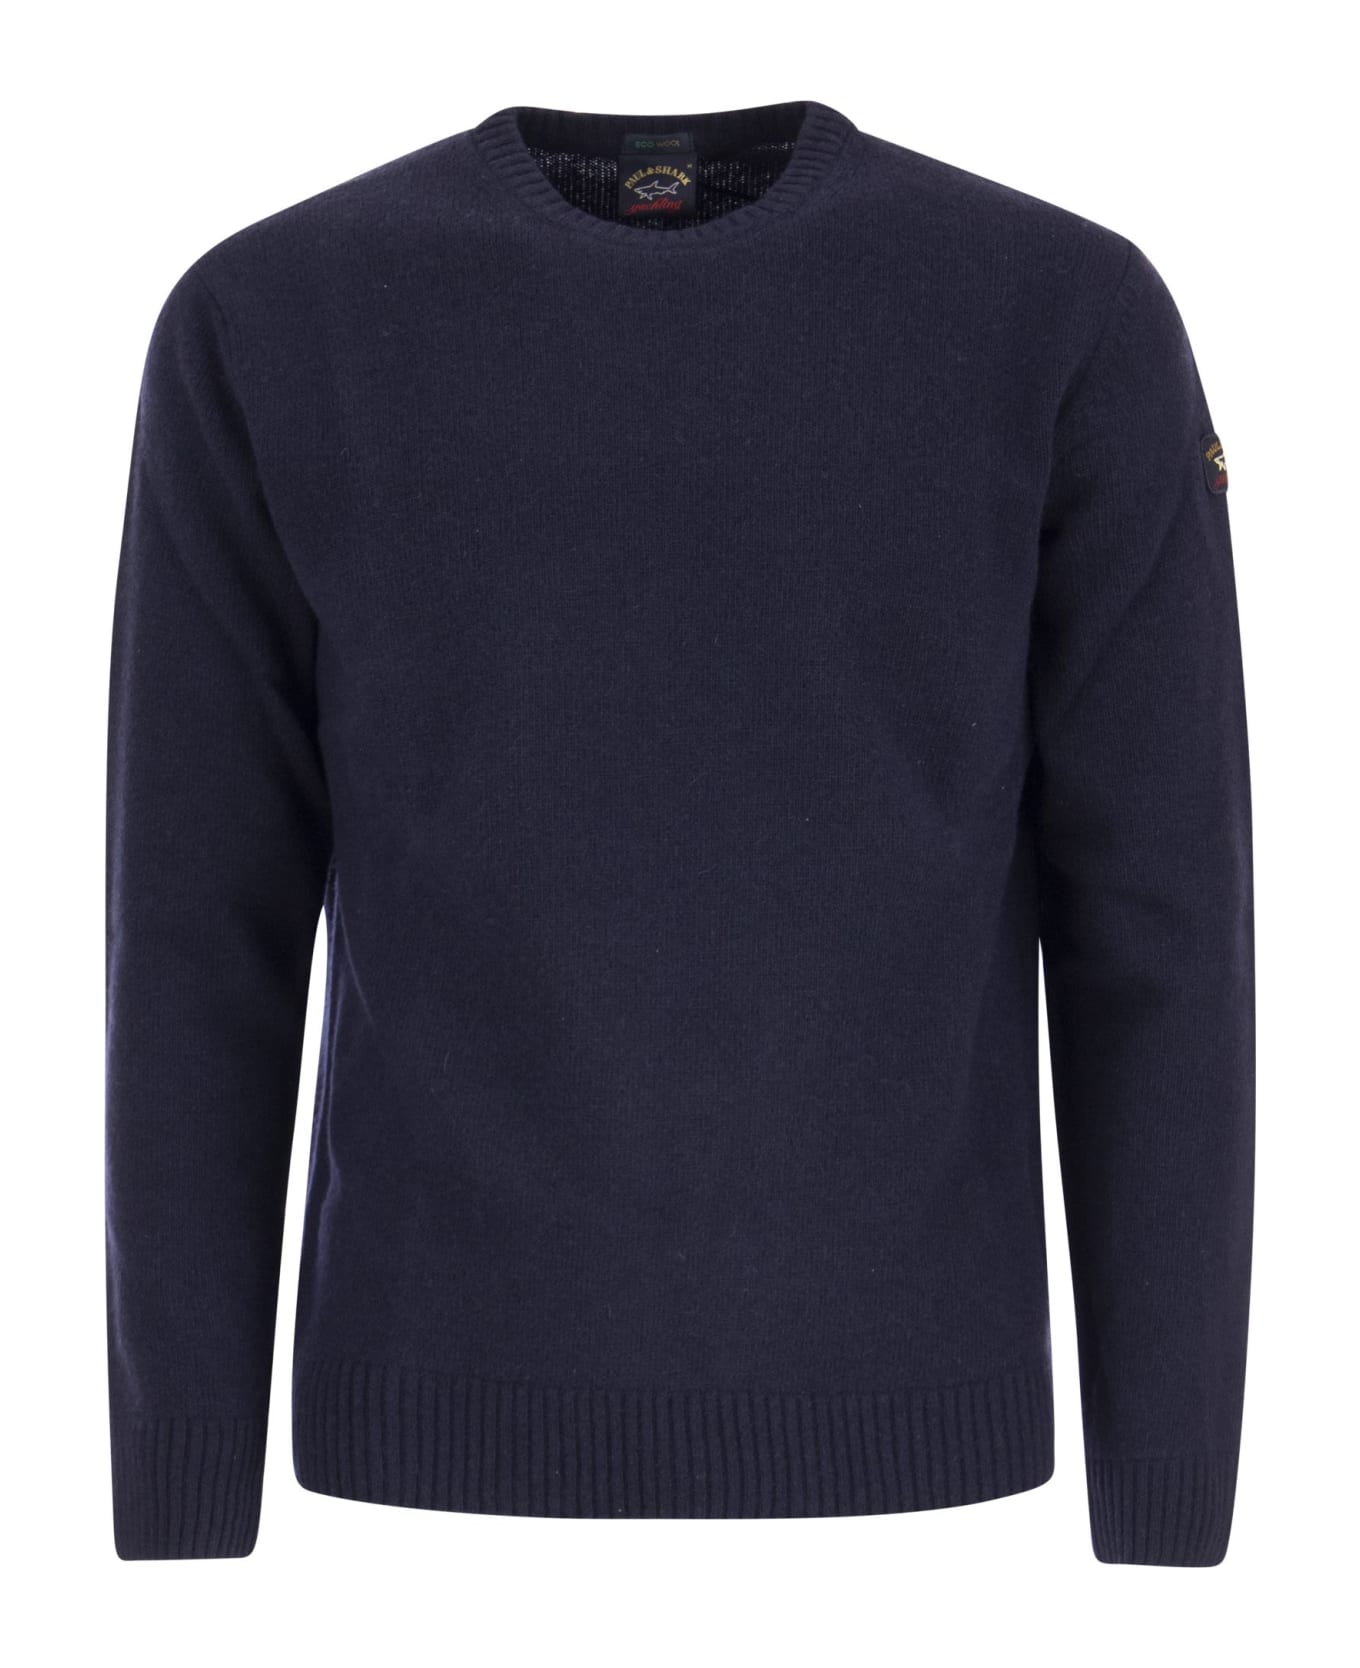 Paul&Shark Wool Crew Neck With Arm Patch Sweater - BLU SCURO